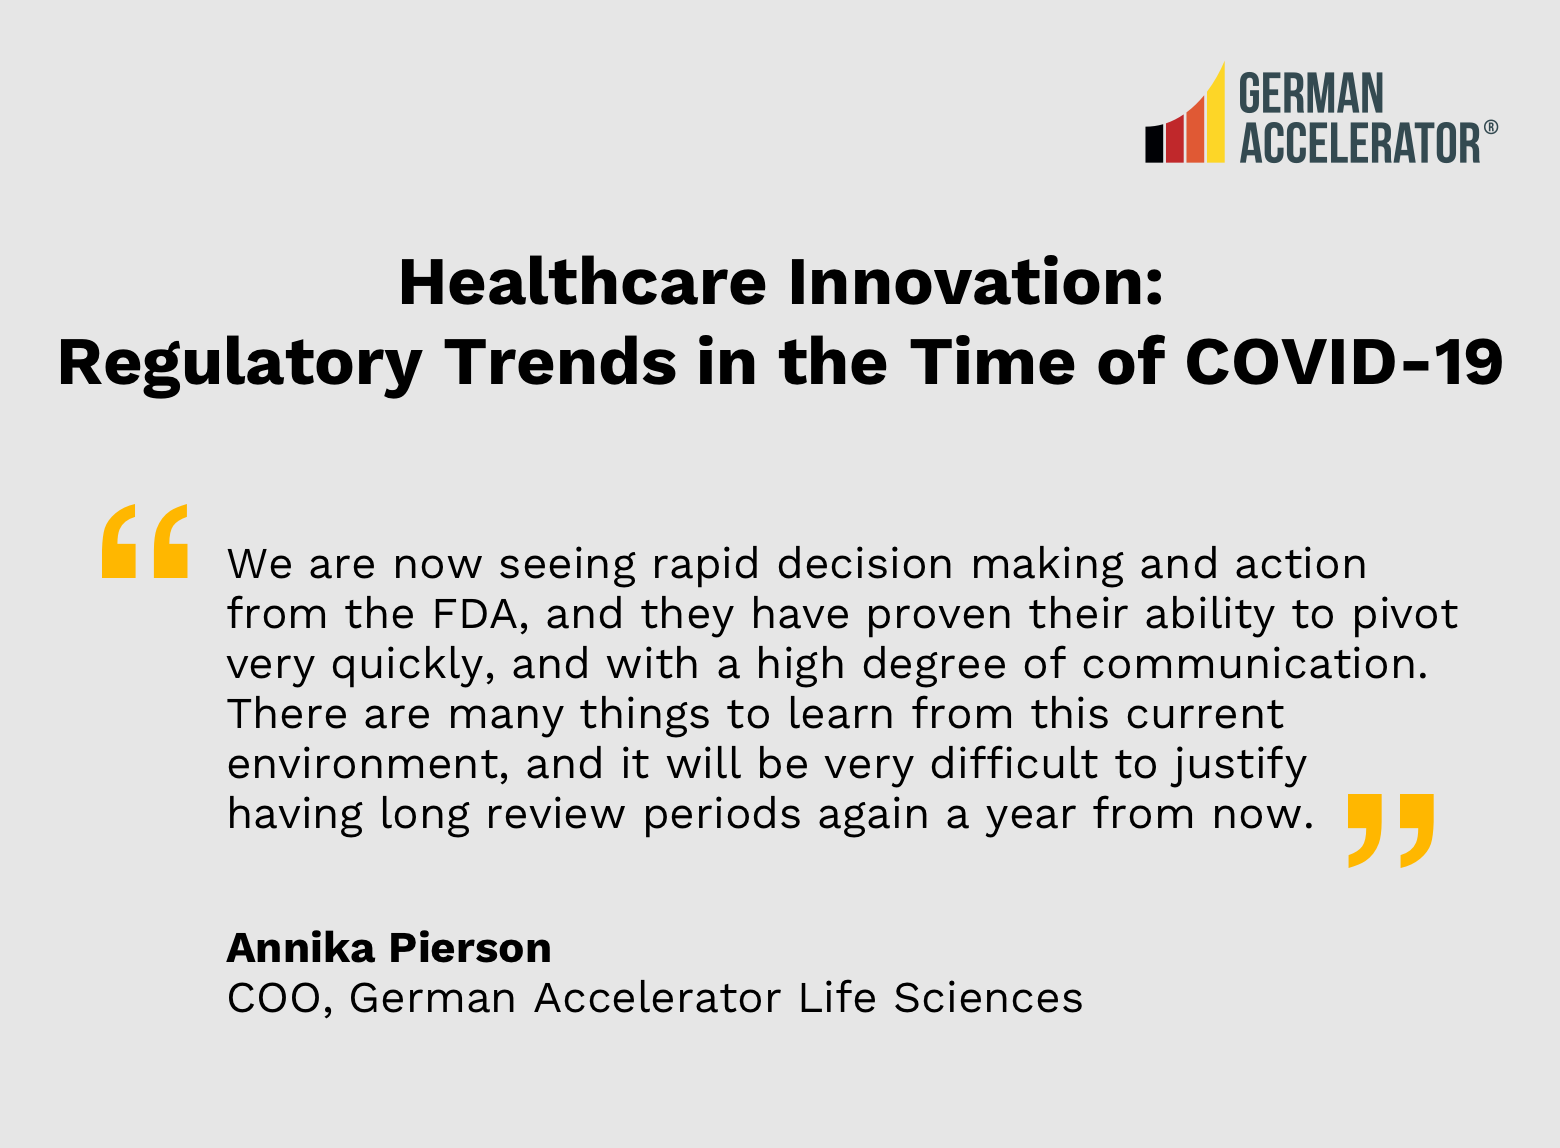 Healthcare Innovation: Regulatory Trends in the Time of Covid-19 (Series 2 of 3)